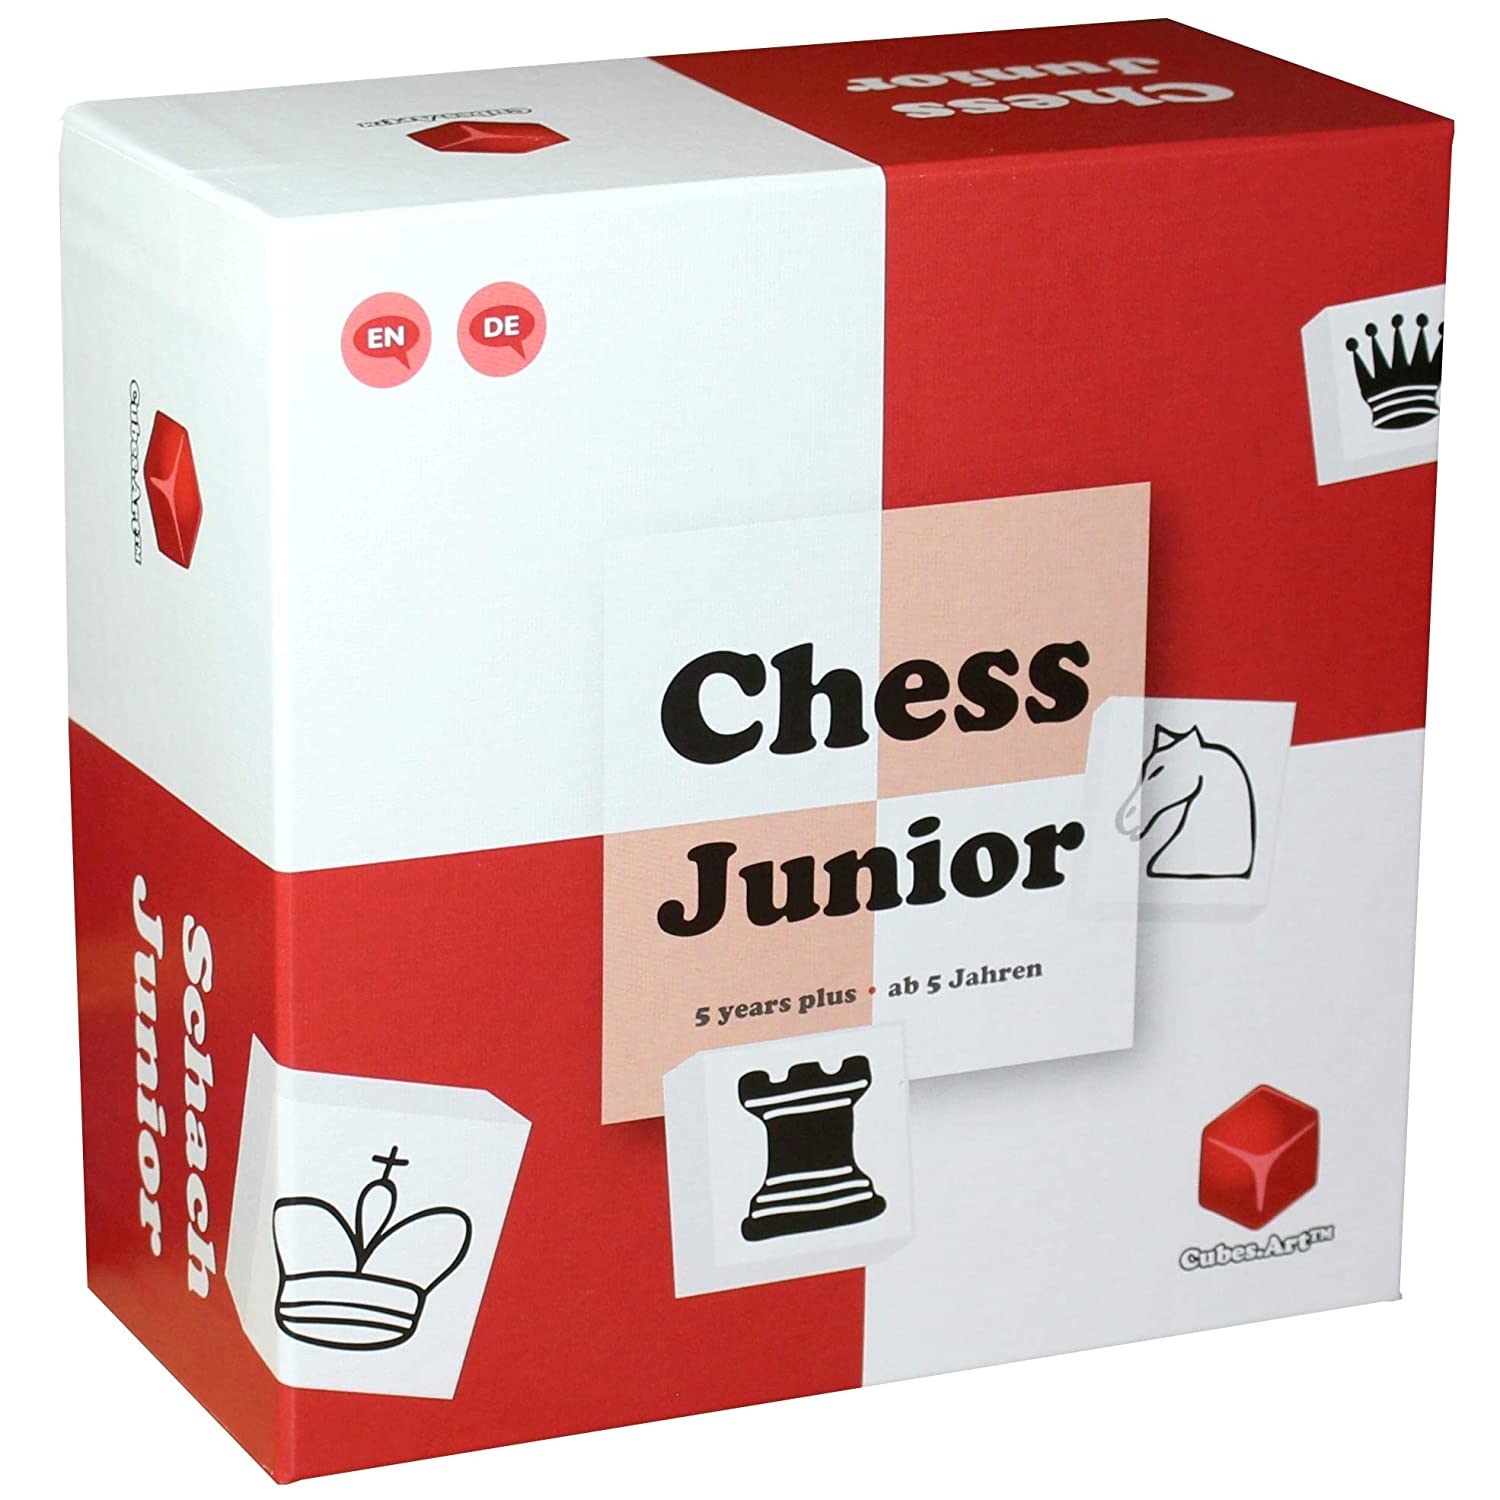 Chess Junior - Chess Set for Kids and Beginners. Teaching Chess Board Game